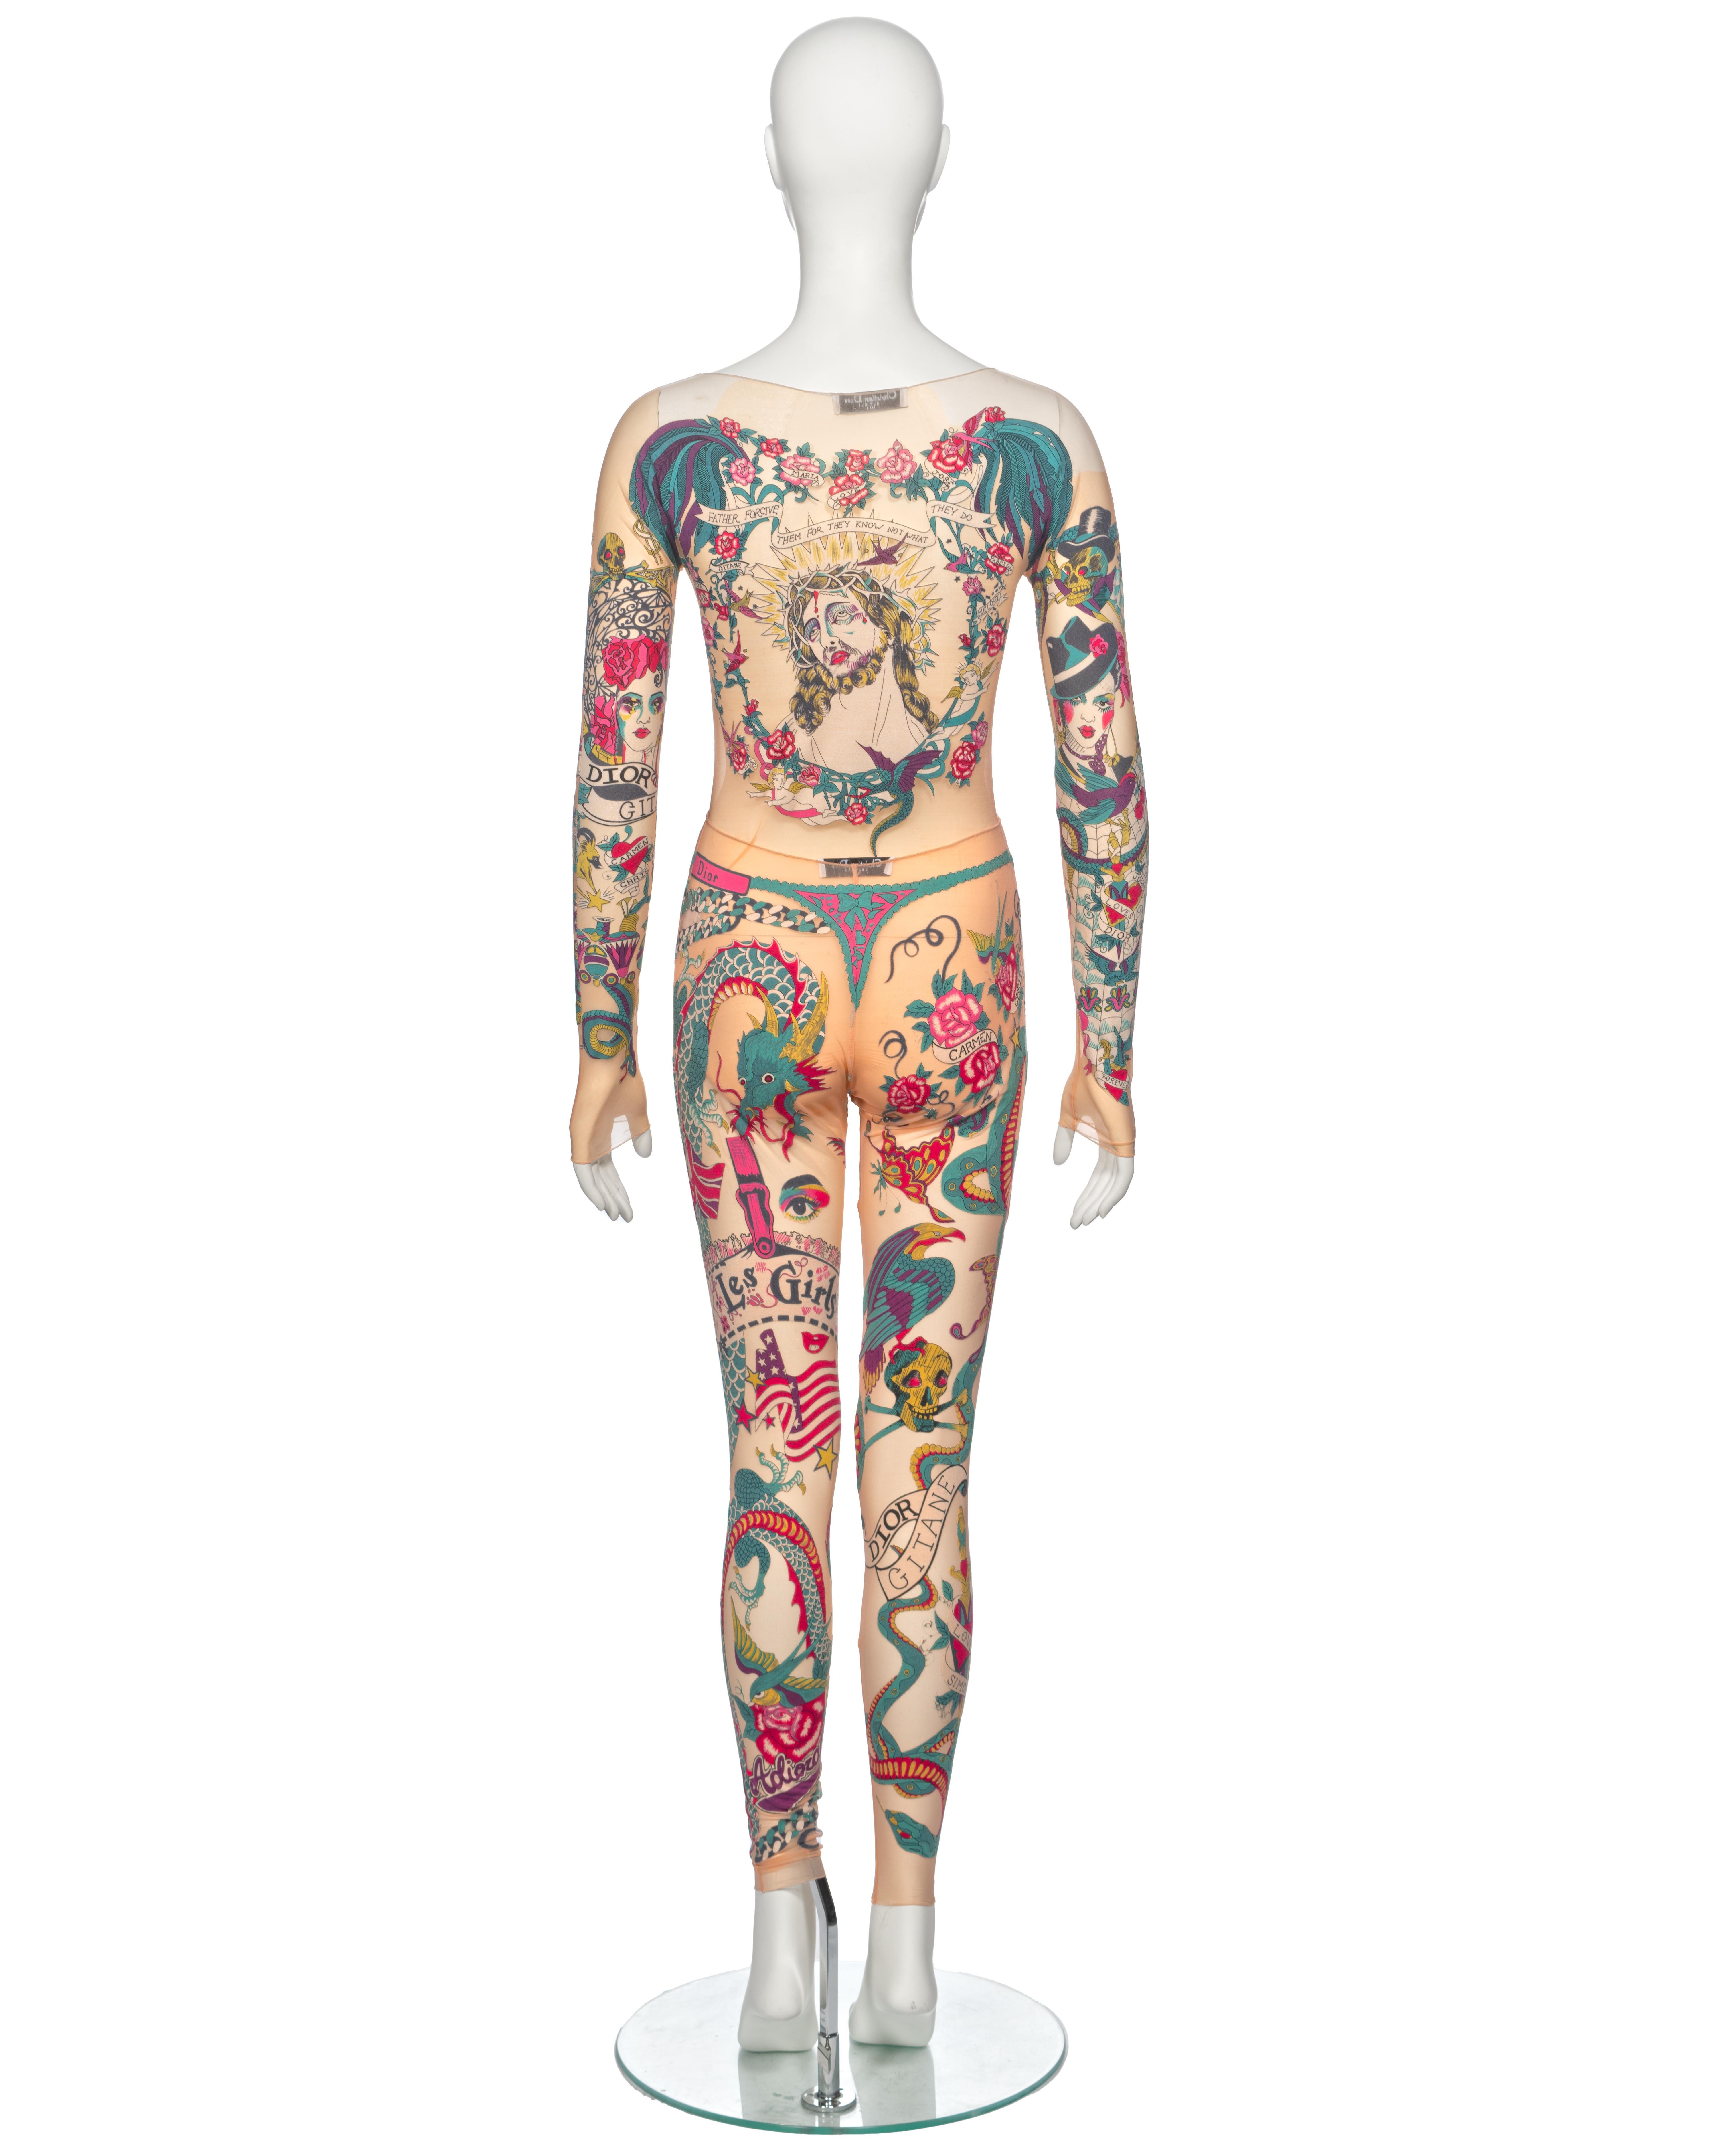 Christian Dior by John Galliano Tattoo Print Body, Leggings and Skirt, ss 2004 For Sale 15